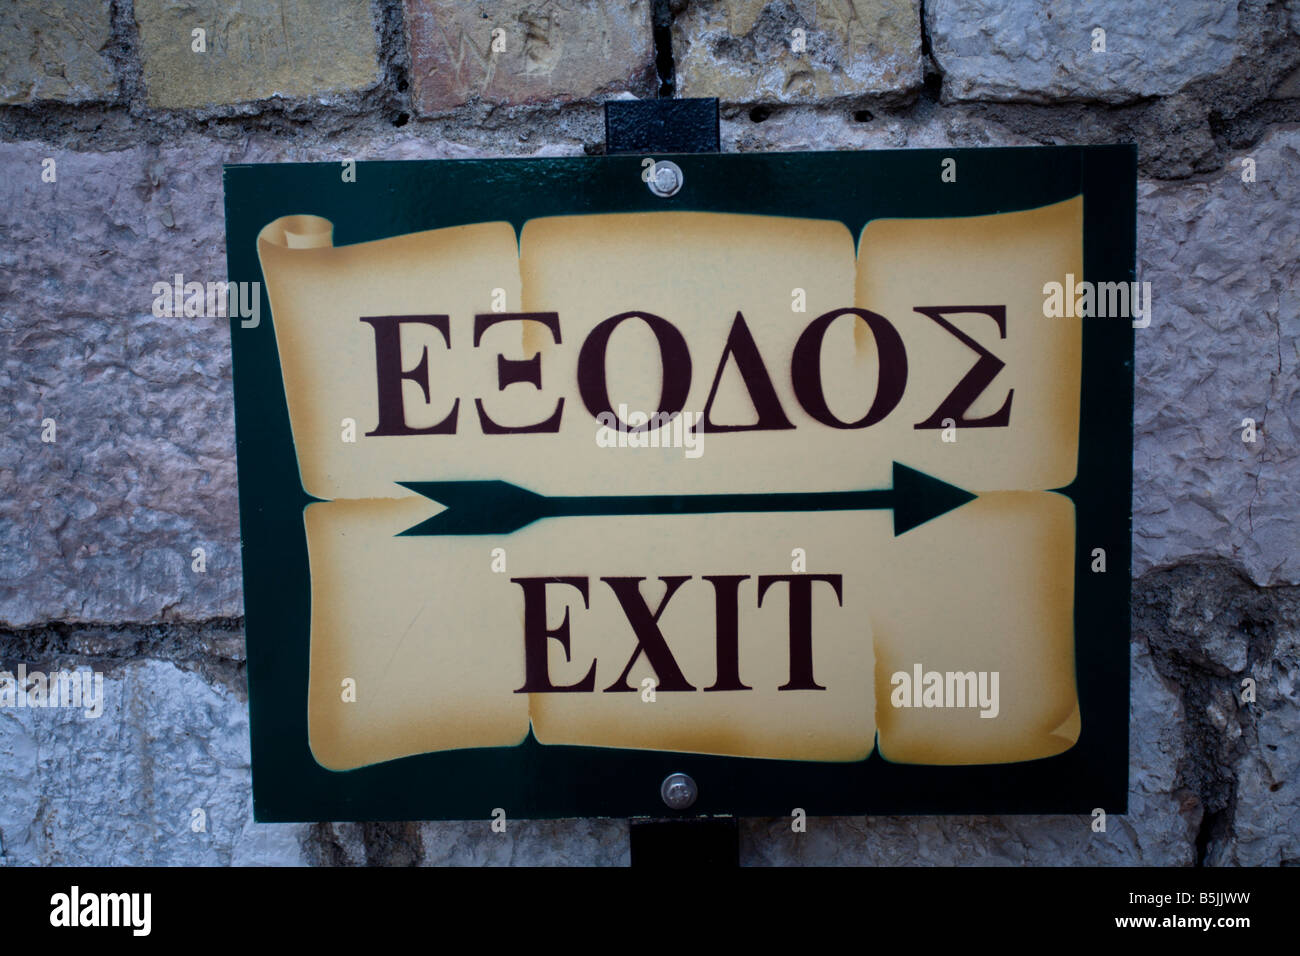 Greek exit sign Stock Photo